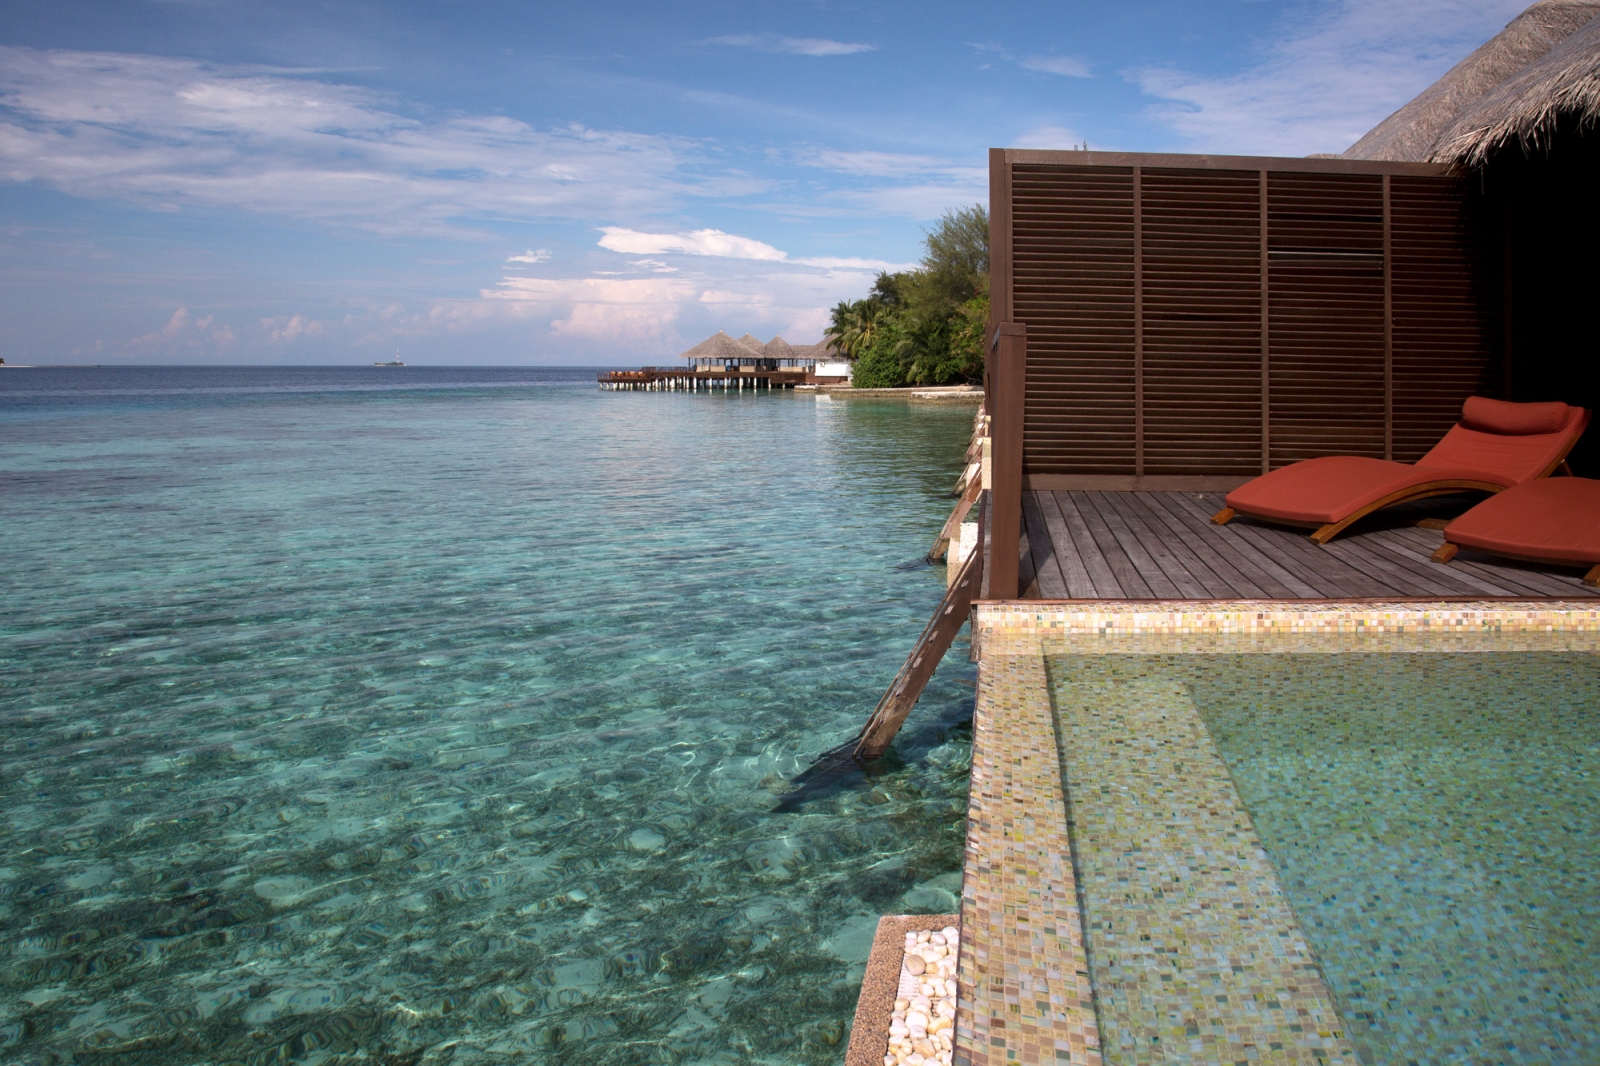 content/hotel/Coco Bodu Hithi/Accommodation/Water Villa/CocoBodu-Acc-WaterVilla-04.jpg